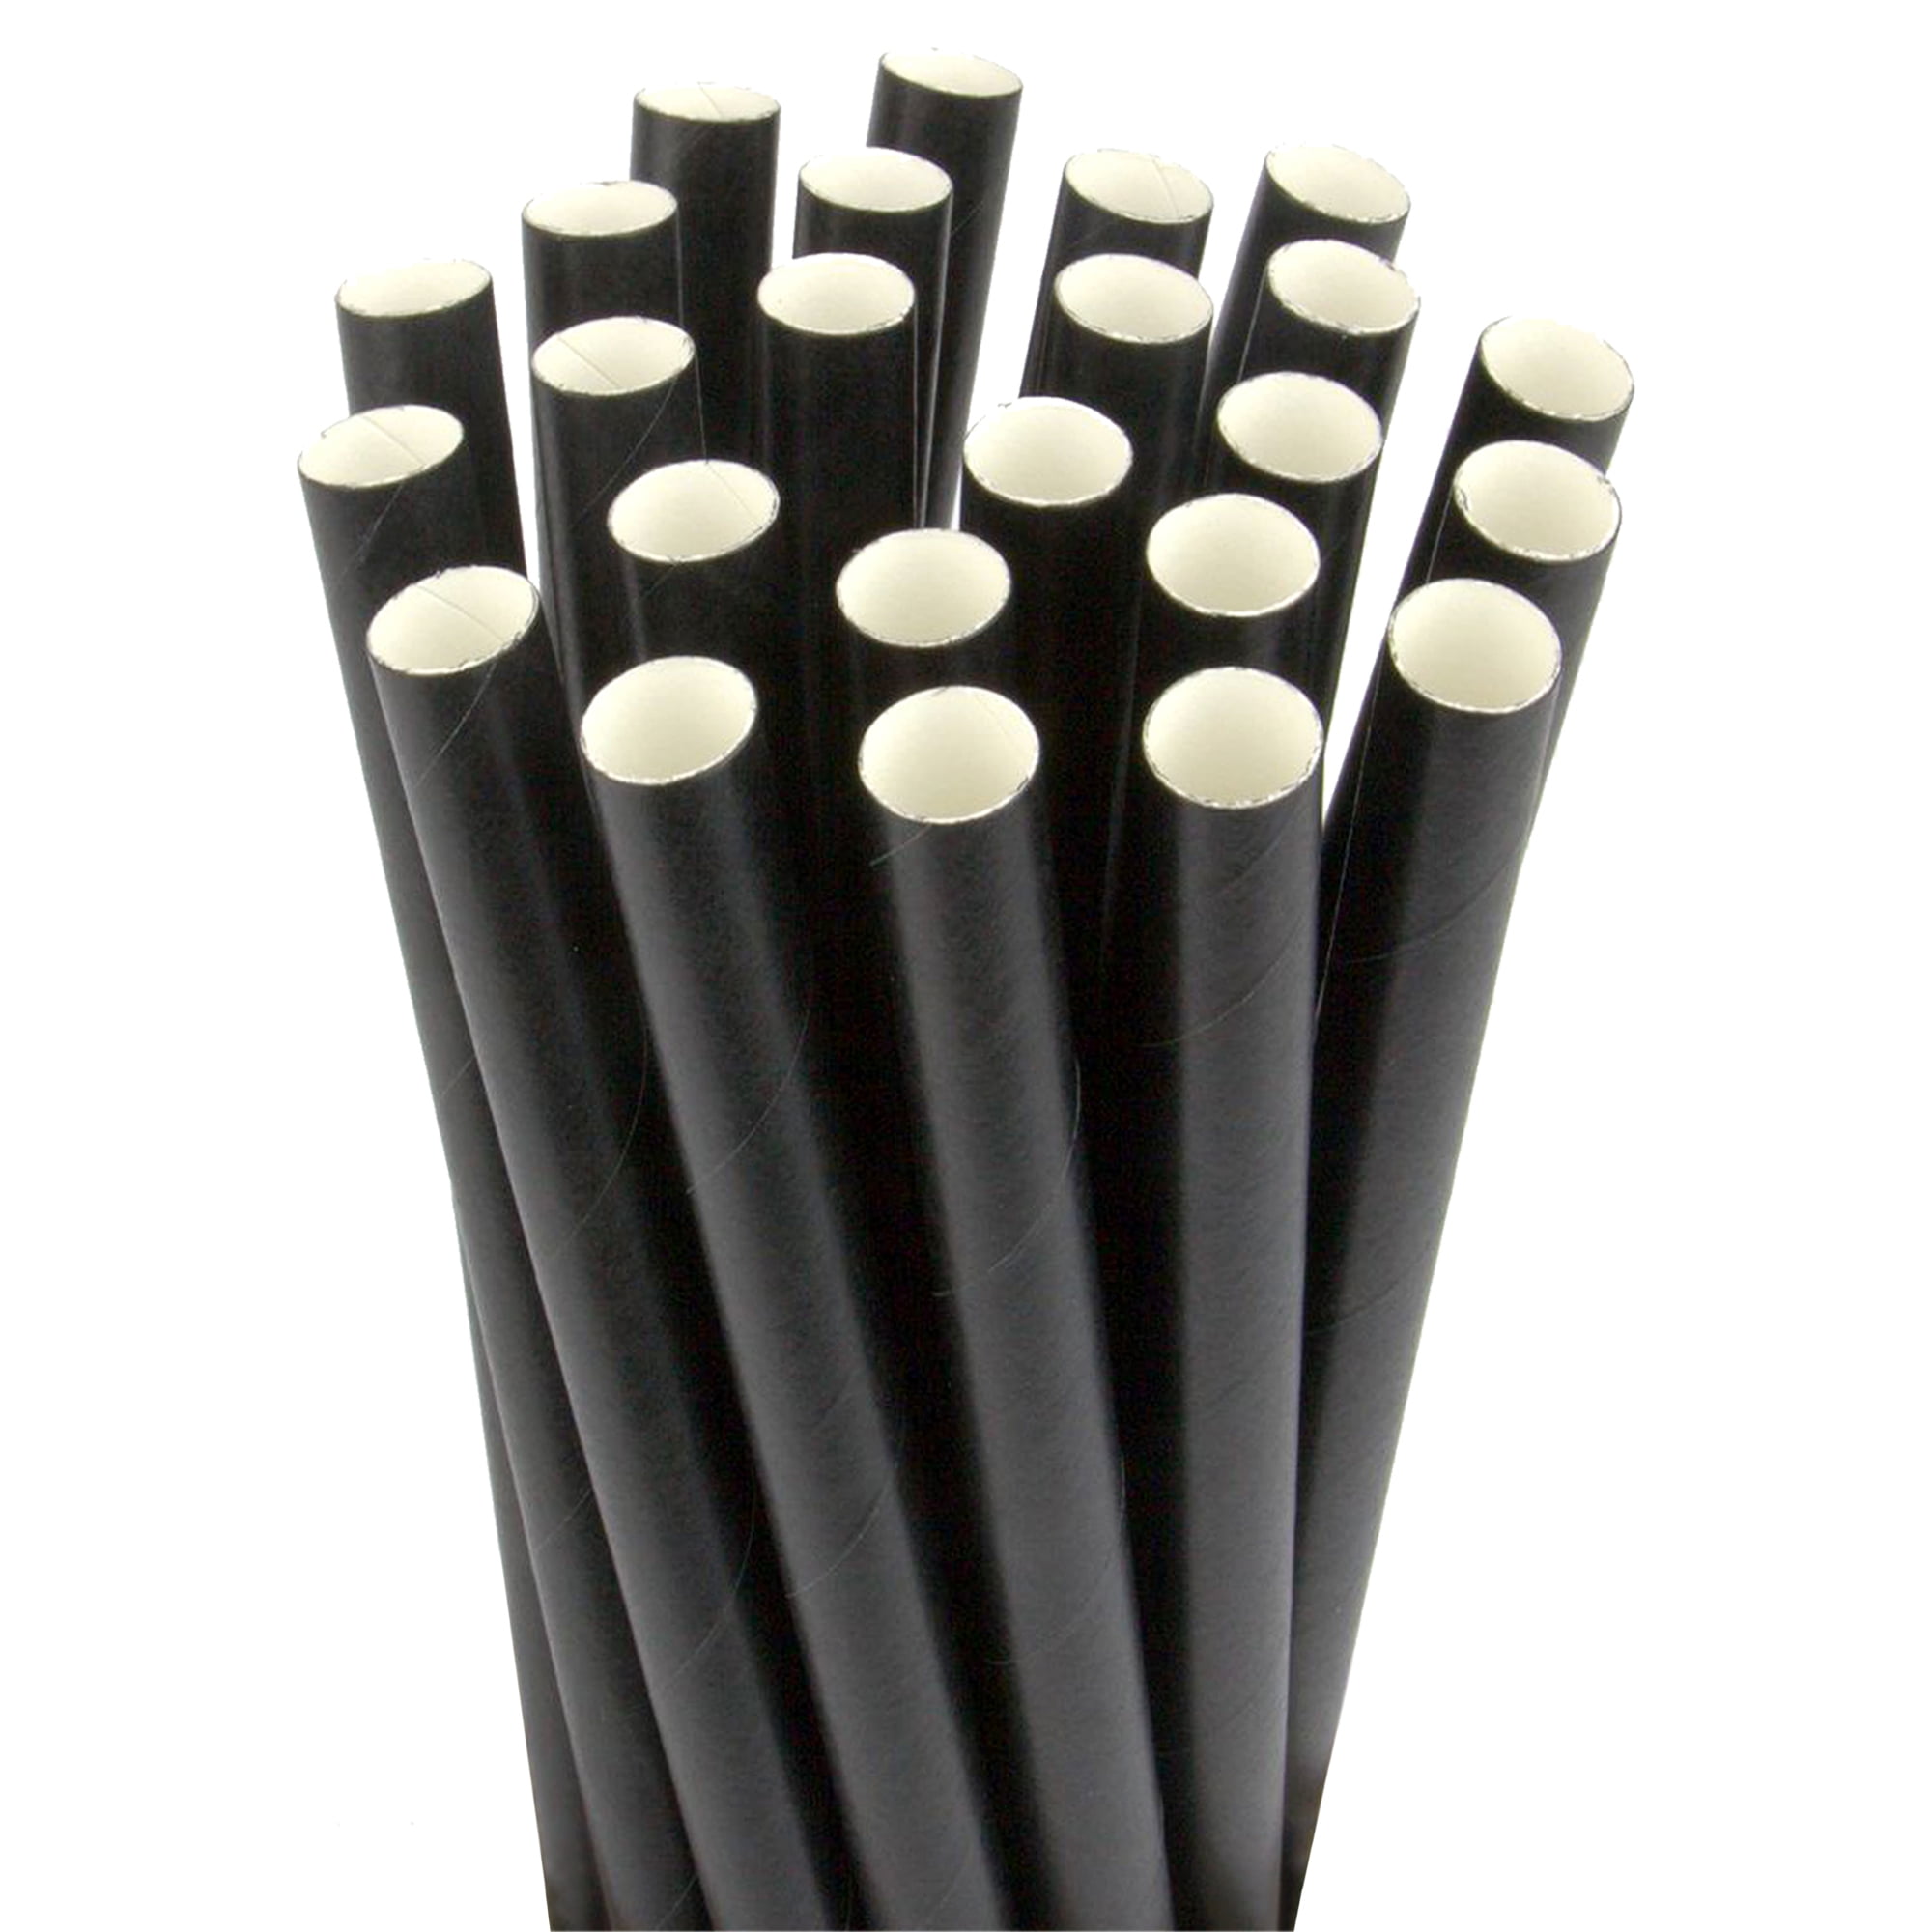 Lot Silicone Straw Tips Covers Fit for 6 mm Straws In Compostable Bag Safe Reuse 